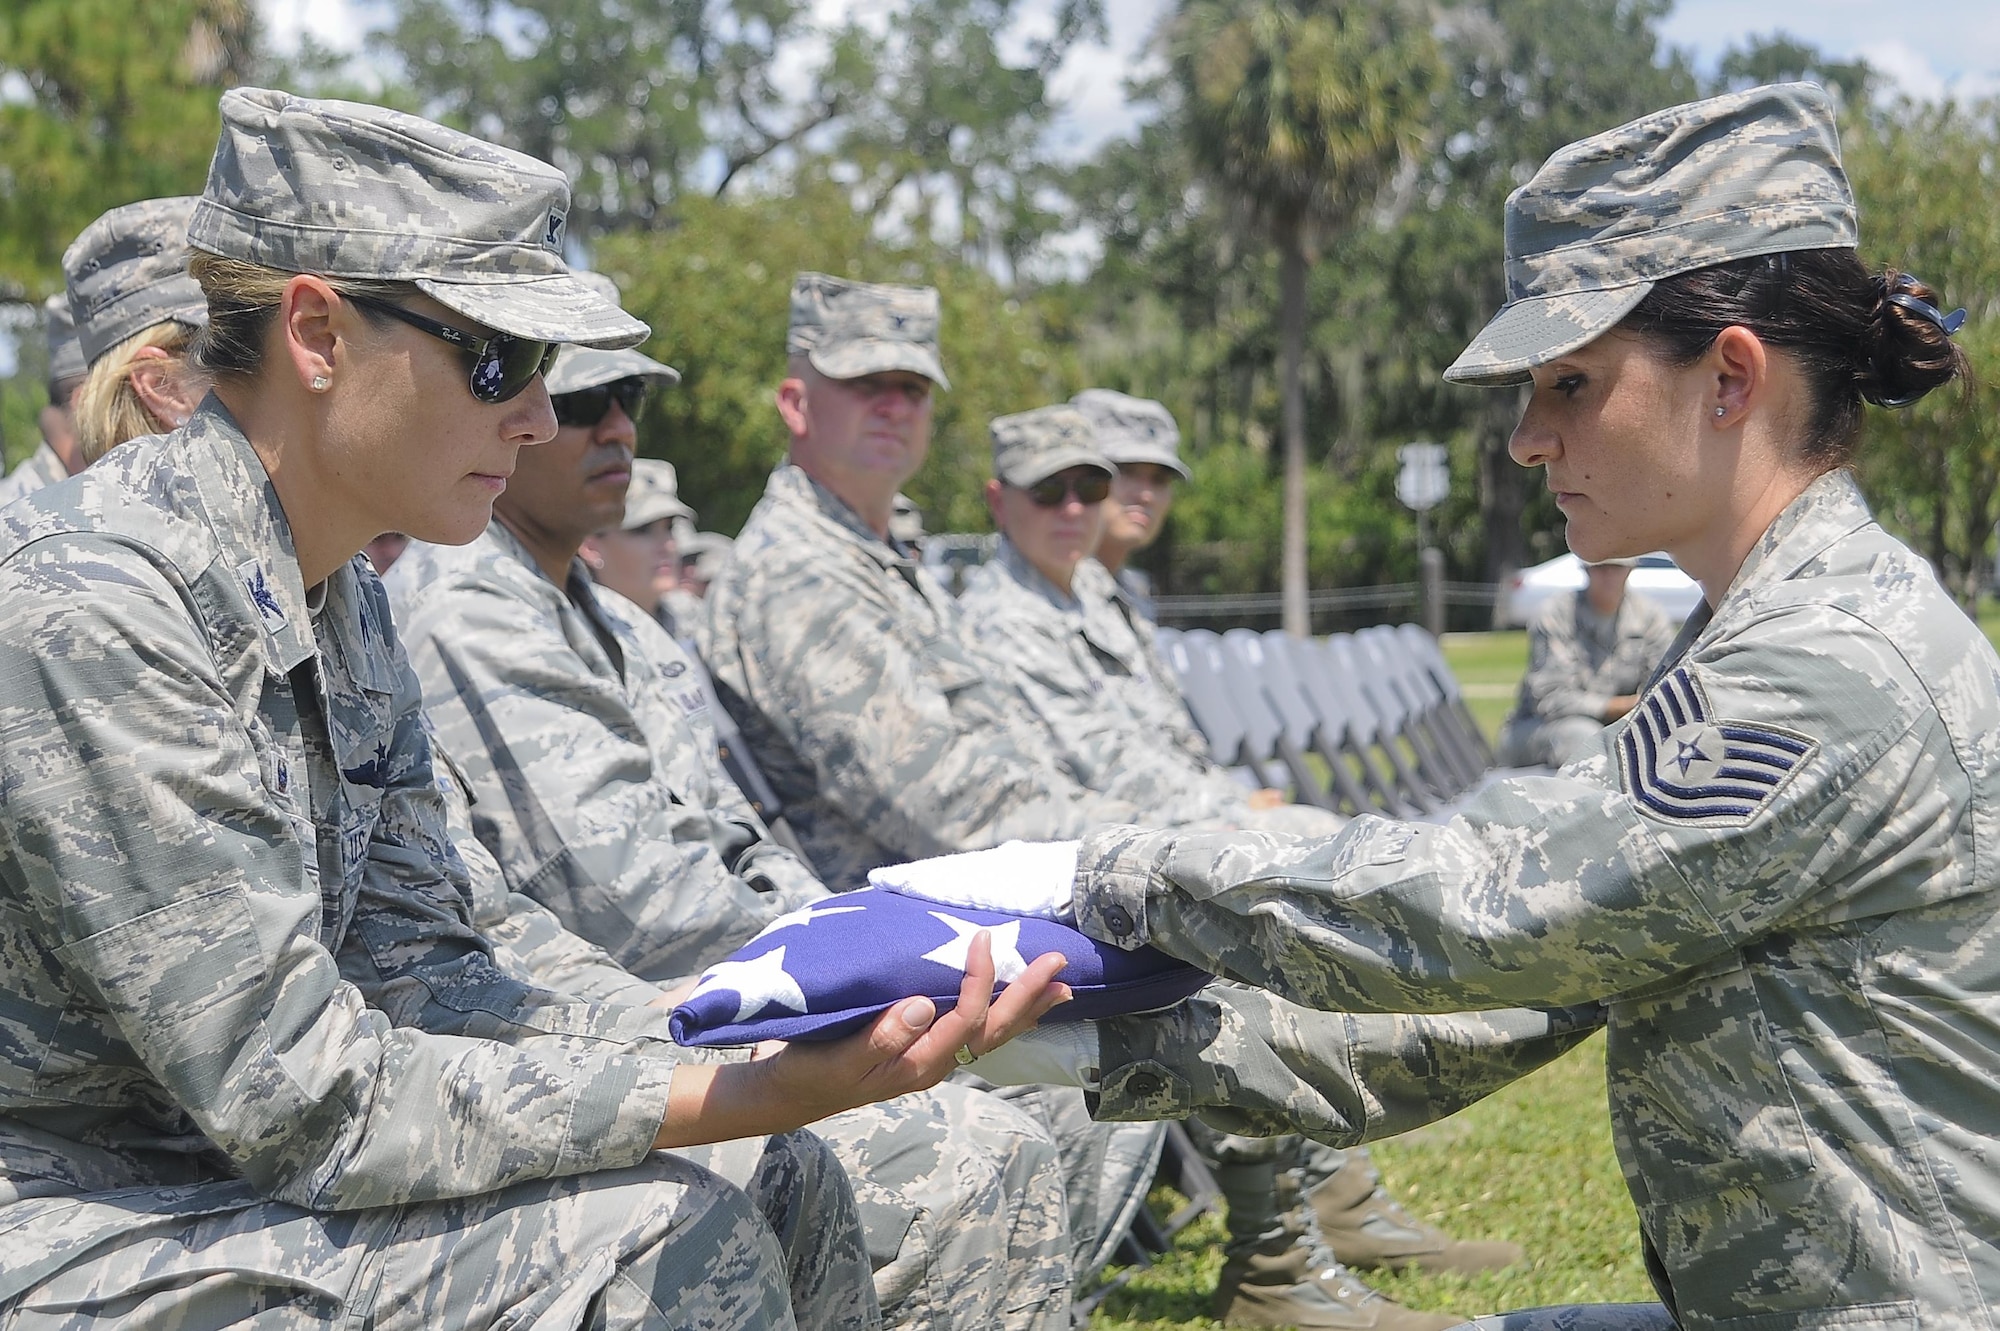 Col. April Vogel, left, the commander of the 6th Air Mobility Wing, is presented a flag from Tech. Sgt. Bajame Kirby, the NCO in charge of the MacDill Base Honor Guard assigned to the 6th Force Support Squadron, during an active-duty full-honors funeral demonstration at MacDill Air Force Base, Fla., Sept. 6, 2016. During a military funeral, the next of kin is presented the folded American flag. (U.S. Air Force photo by Airman 1st Class Mariette Adams)